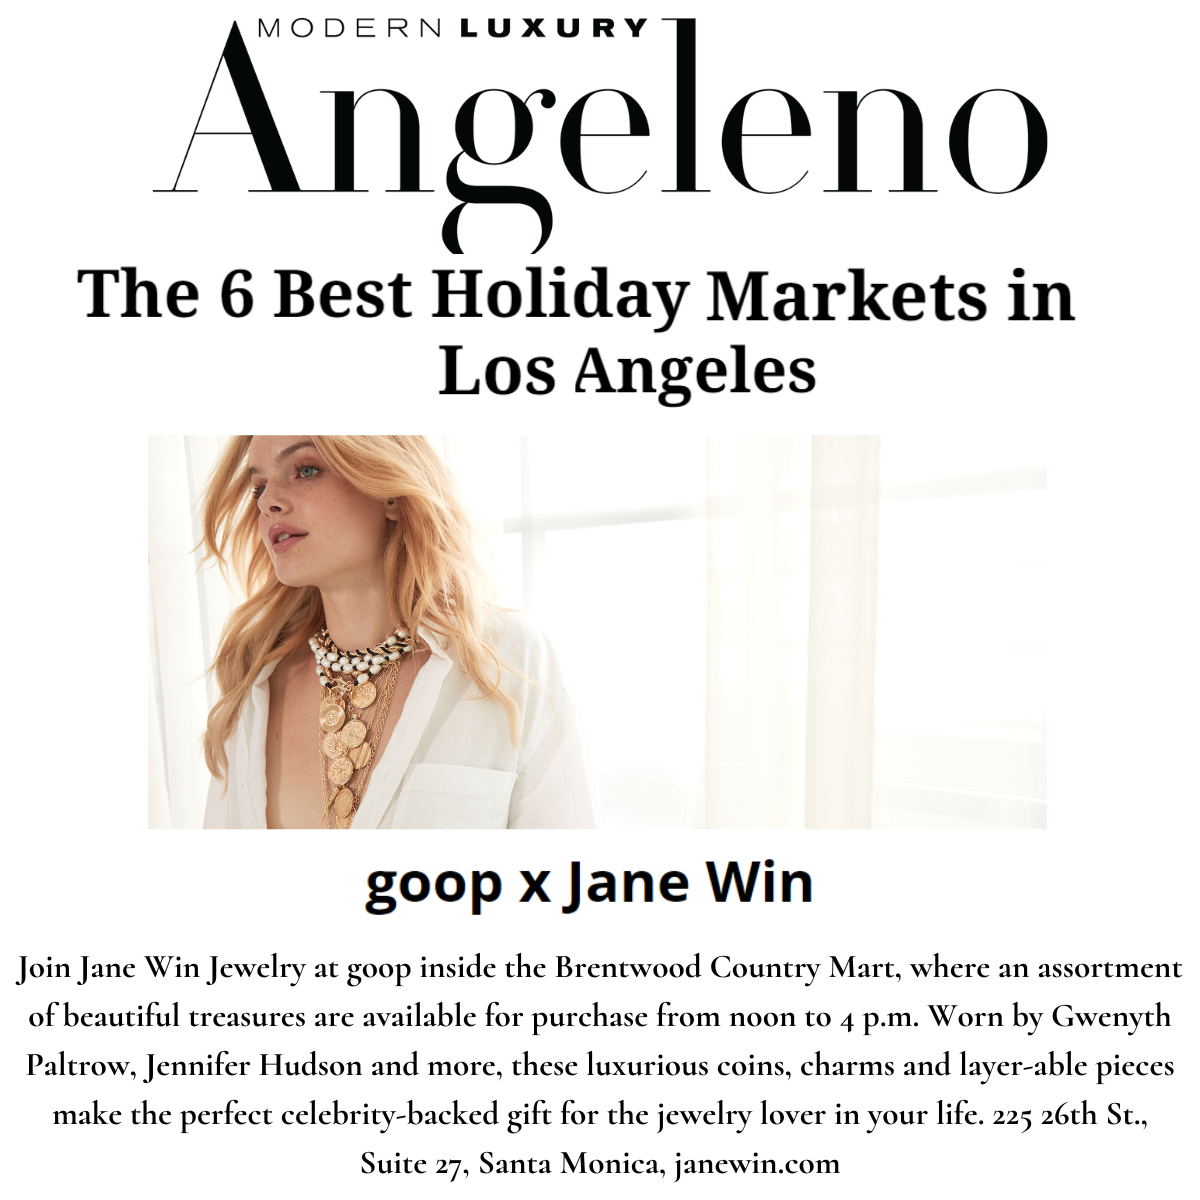 Press Highlight: Modern Luxury Angeleno's 6 Best Holiday Markets in Los Angeles